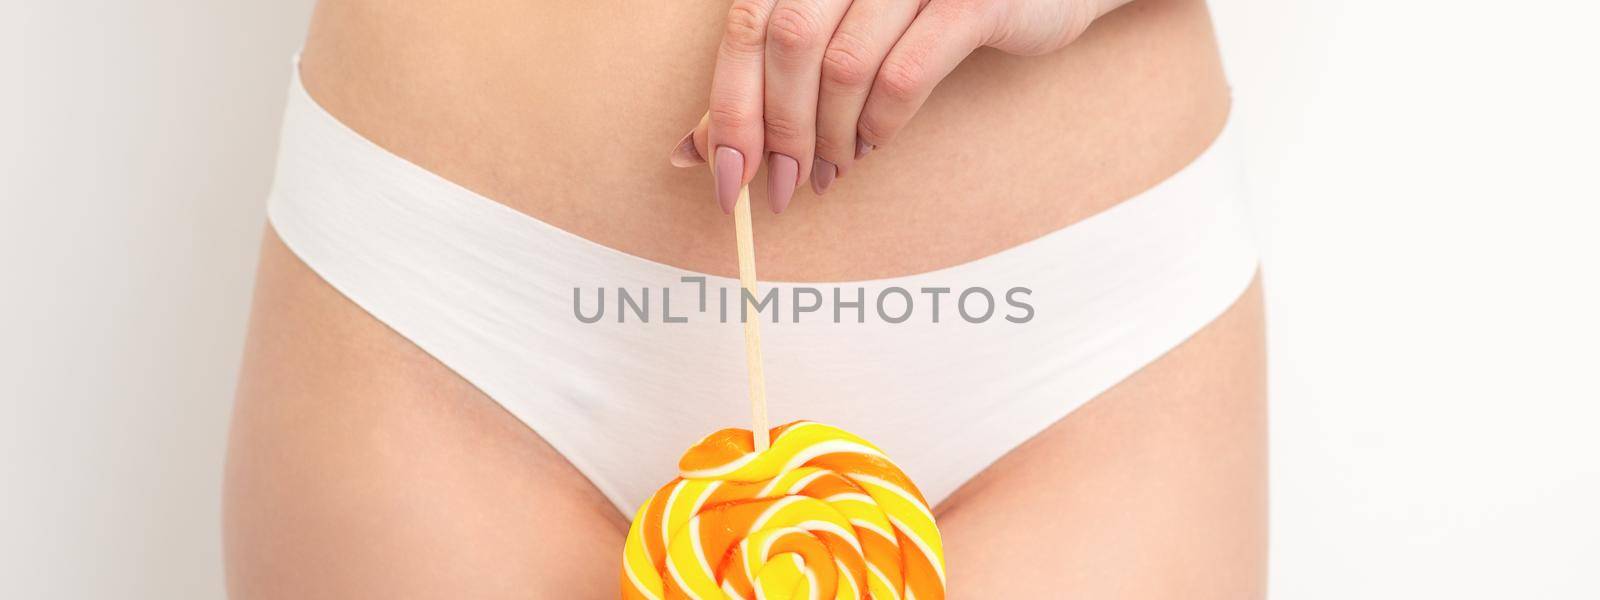 Hand of a woman wearing white panties holding lollipop on a stick covering the intimate area, the concept of intimate depilation, problems of intimate hygiene. by okskukuruza